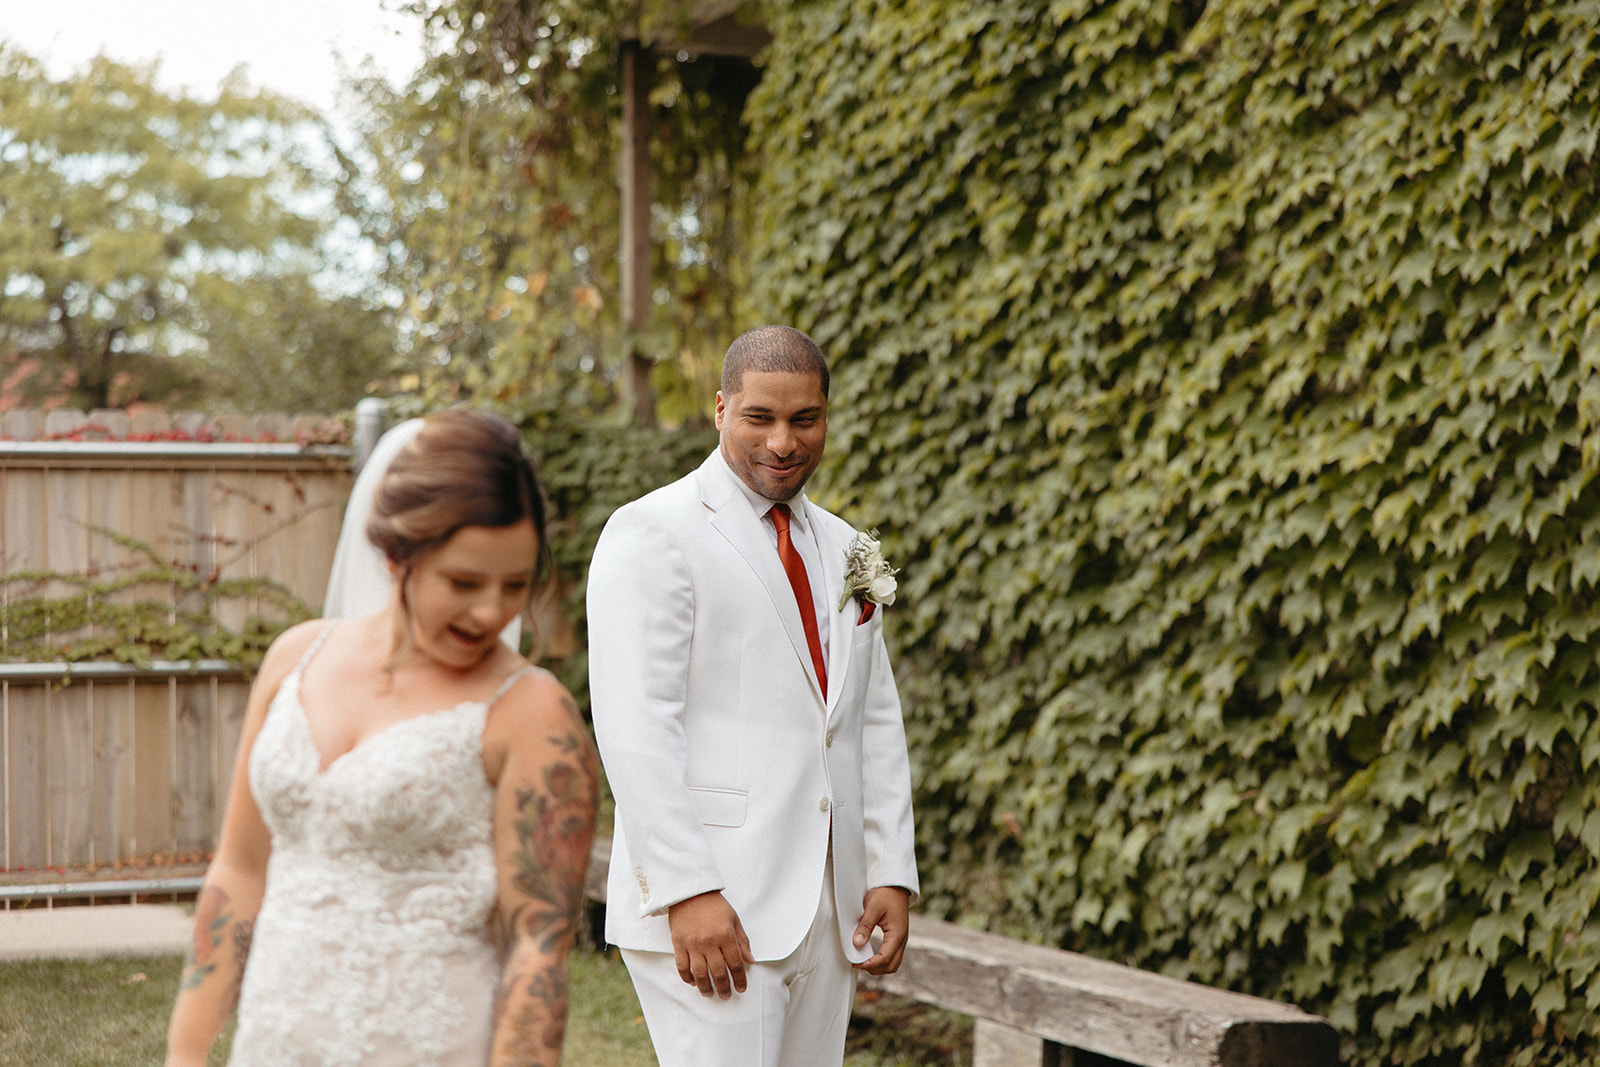 Groom admiring his bride to be in her wedding attire outside of Jam Handy wedding venue in Detroit, Michigan